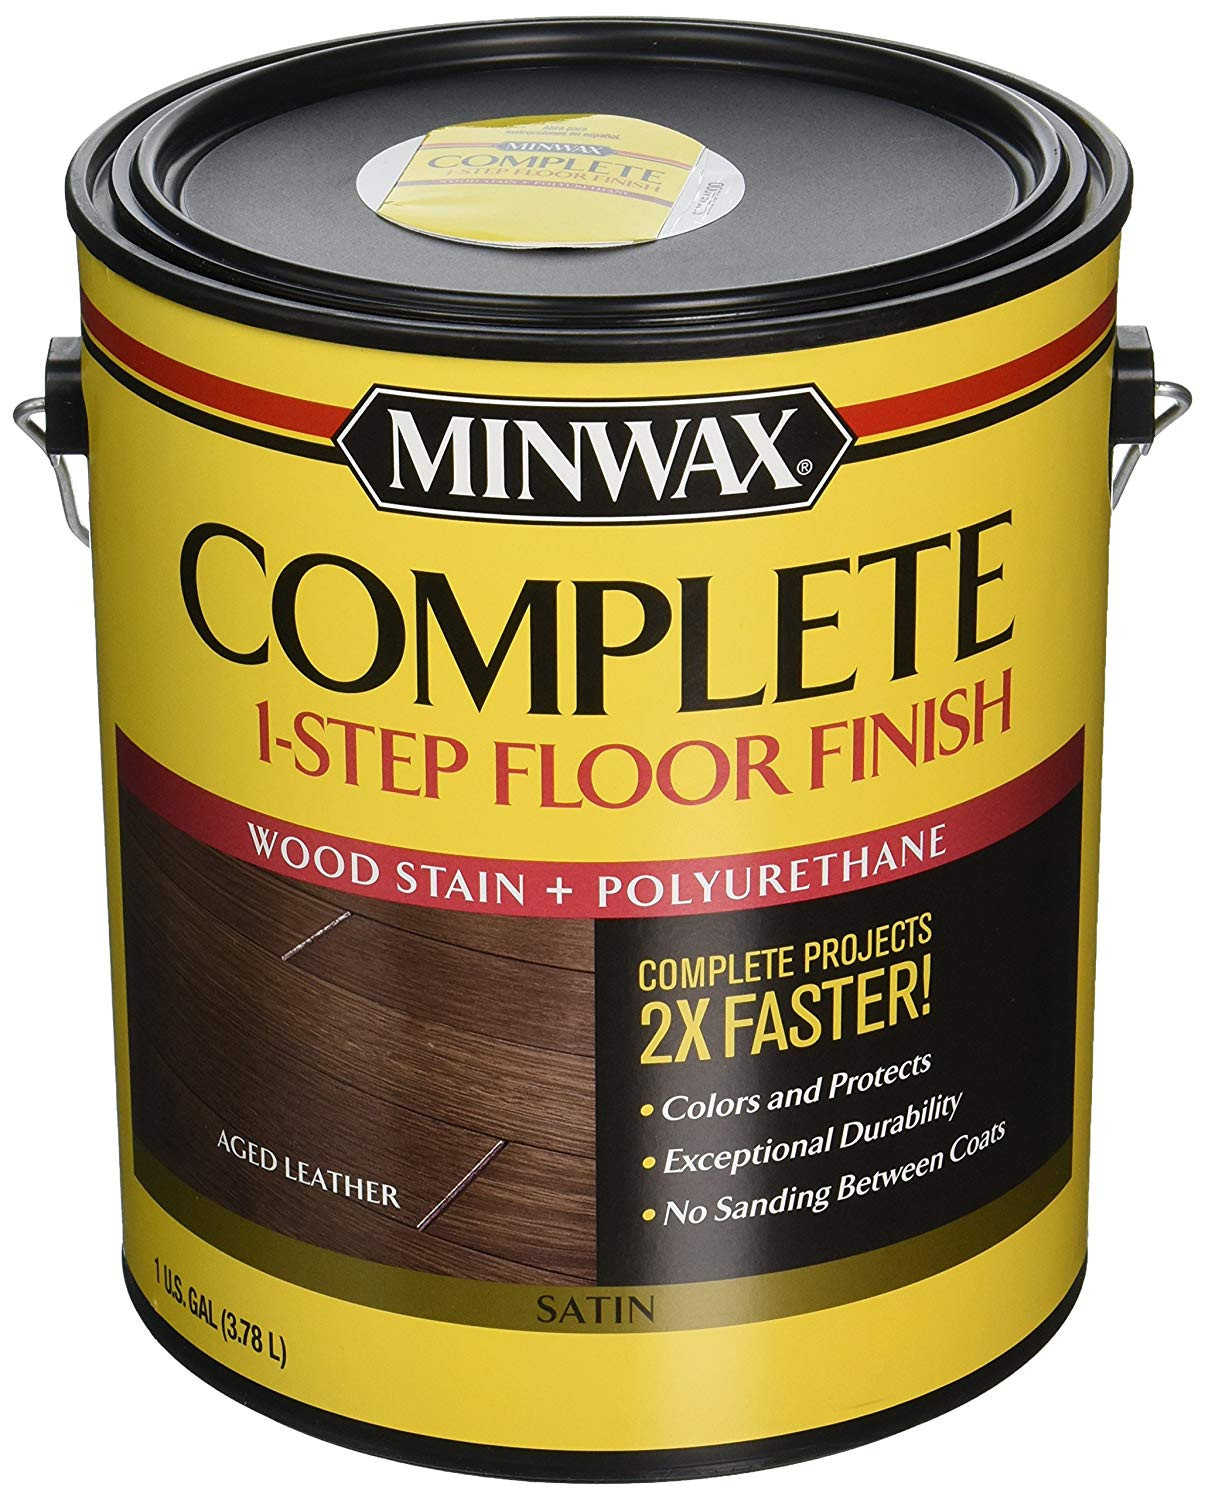 17 attractive How to Stain Hardwood Floors Video 2024 free download how to stain hardwood floors video of minwax 672050000 67205 1g satin aged leather complete 1 step floor pertaining to minwax 672050000 67205 1g satin aged leather complete 1 step floor fini